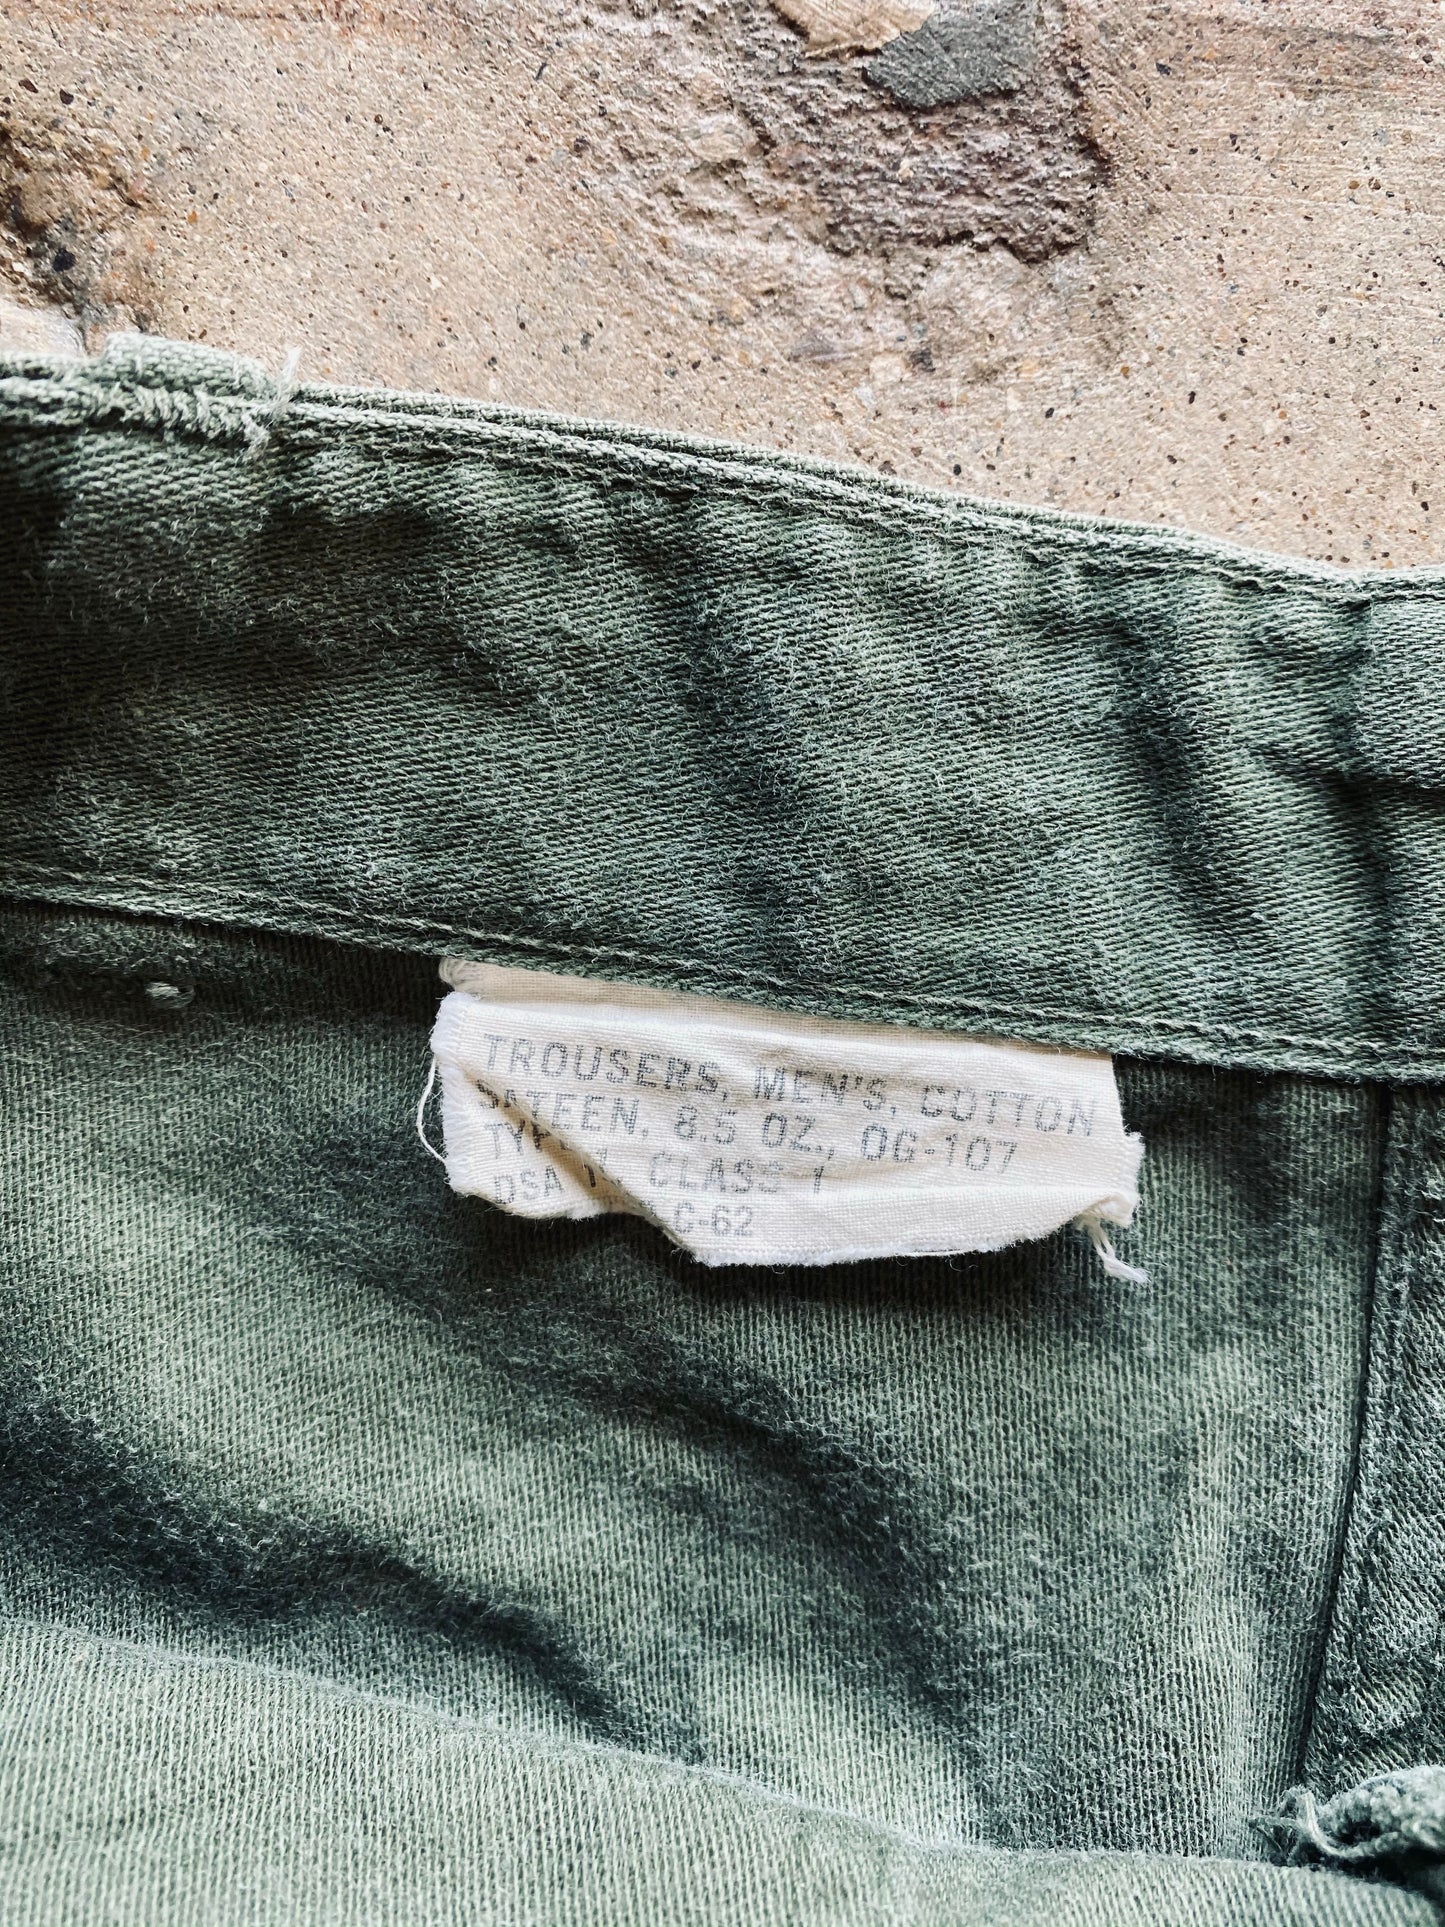 1960s US Army Type-1 Sateen Trouser